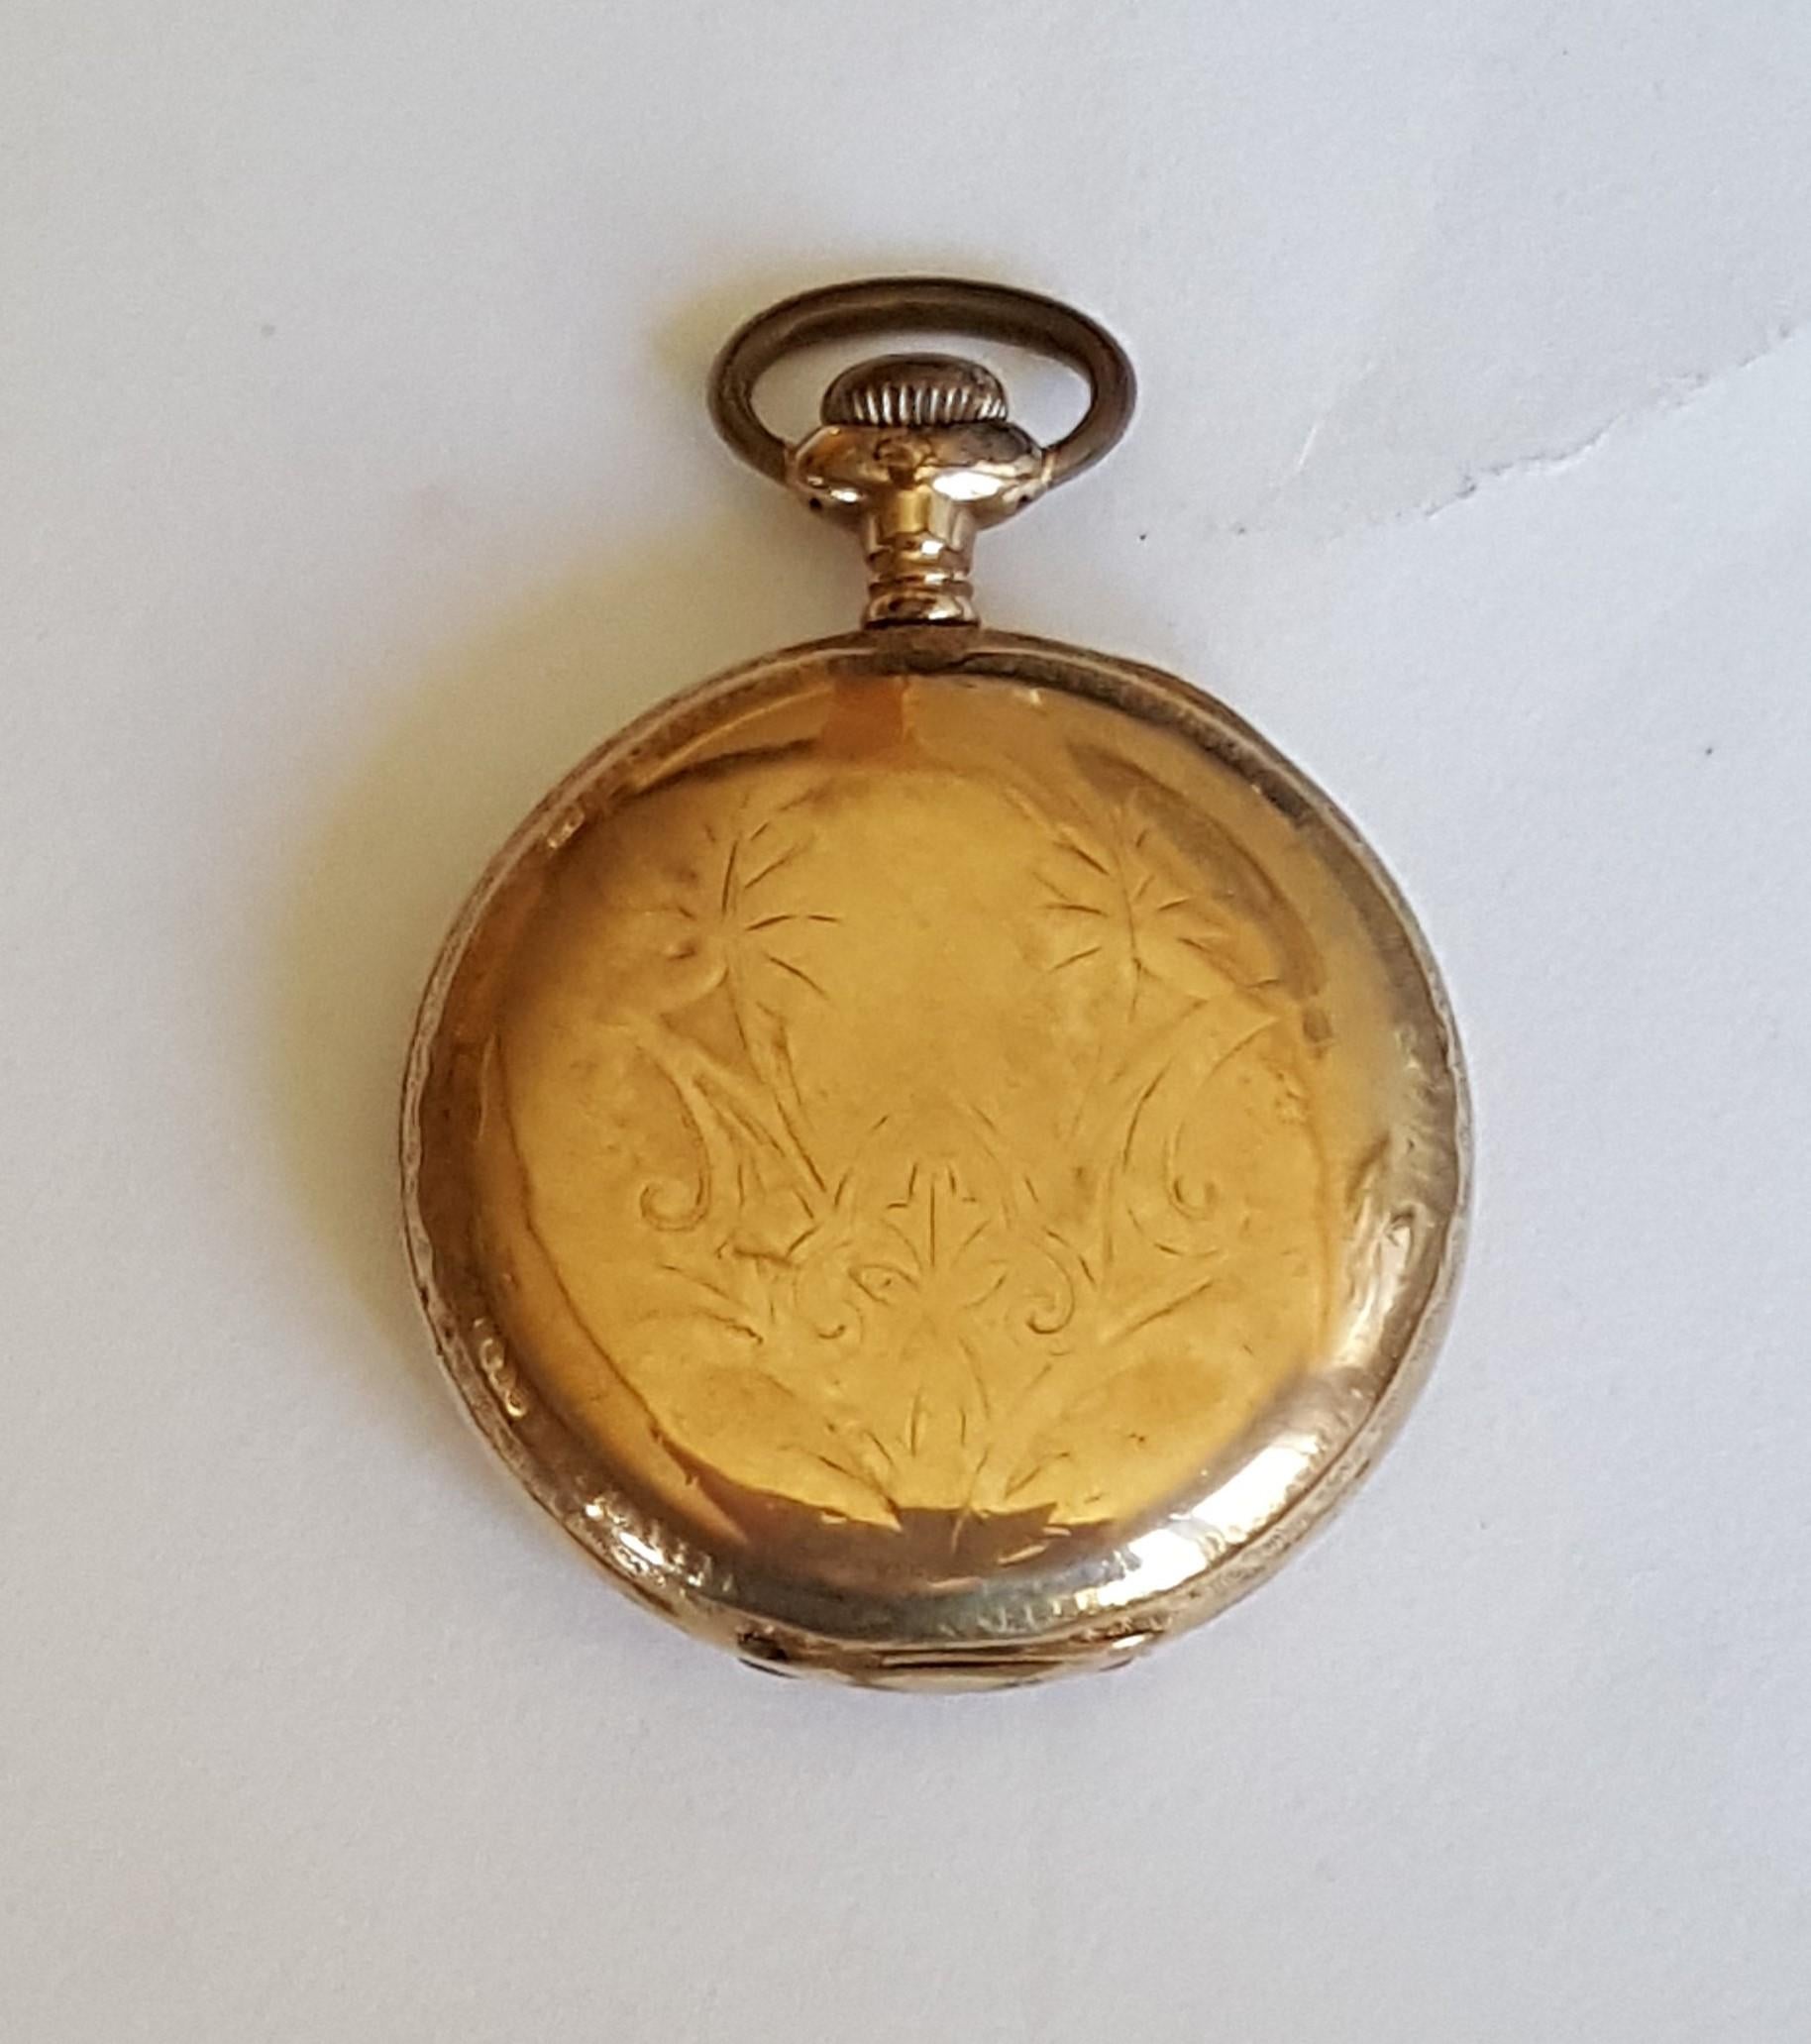 Vintage Gold Plated Waltham Pocket Watch, Working, Year 1907, 7 Jewel, Model 1899, Good Condtion, Hunting, Size 16s

The watch is working. Also the small second hand is working. 

This watch has not been serviced with a complete clean and overhaul